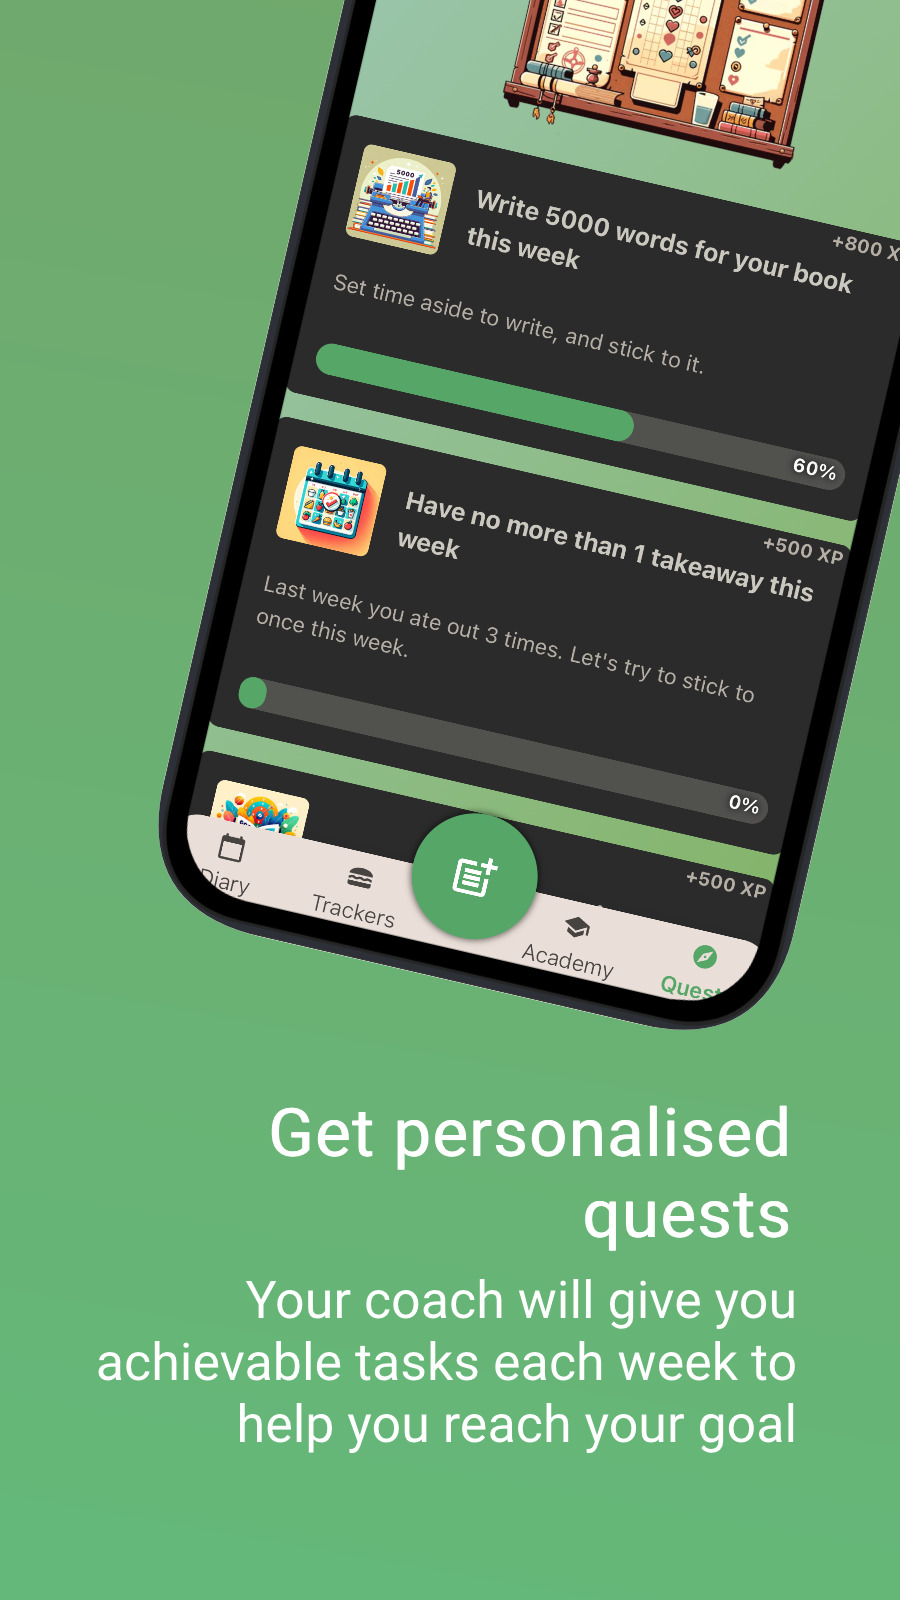 Get personalised quests - Your coach will give you achievable tasks each week to help you reach your goal